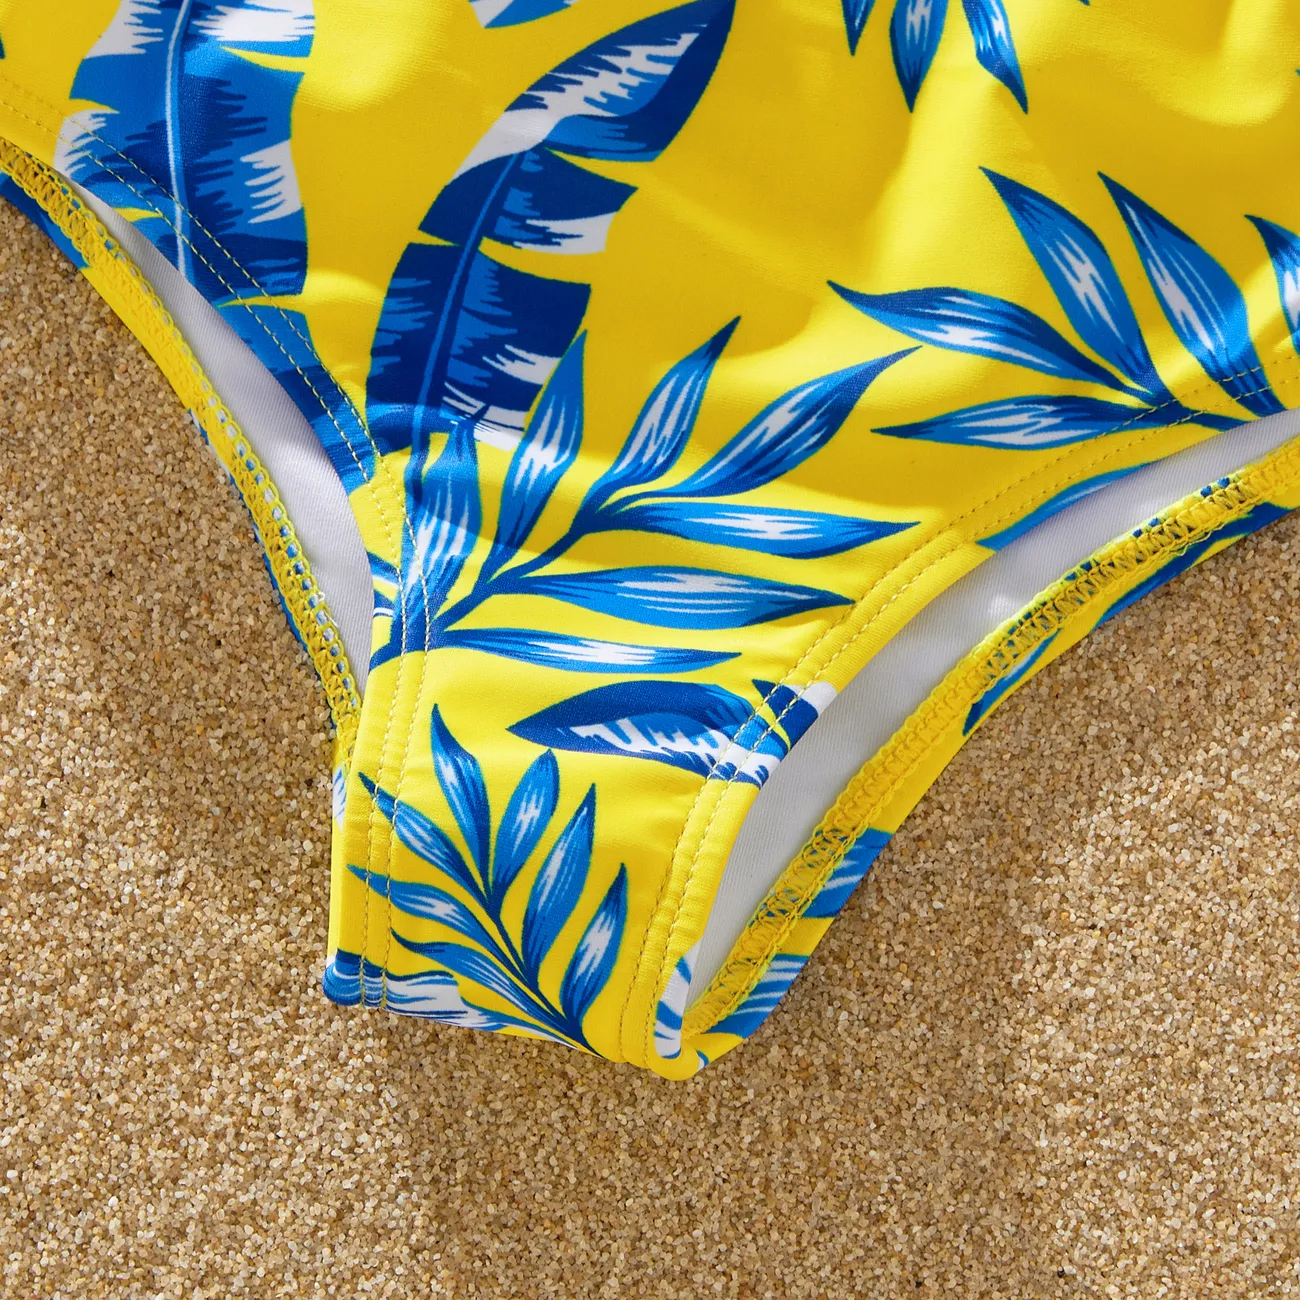 Family Matching Yellow Leaf Print Swim Trunks or Ruched Flutter Sleeve Bikini with Optional Swim Cover Up Yellow big image 1